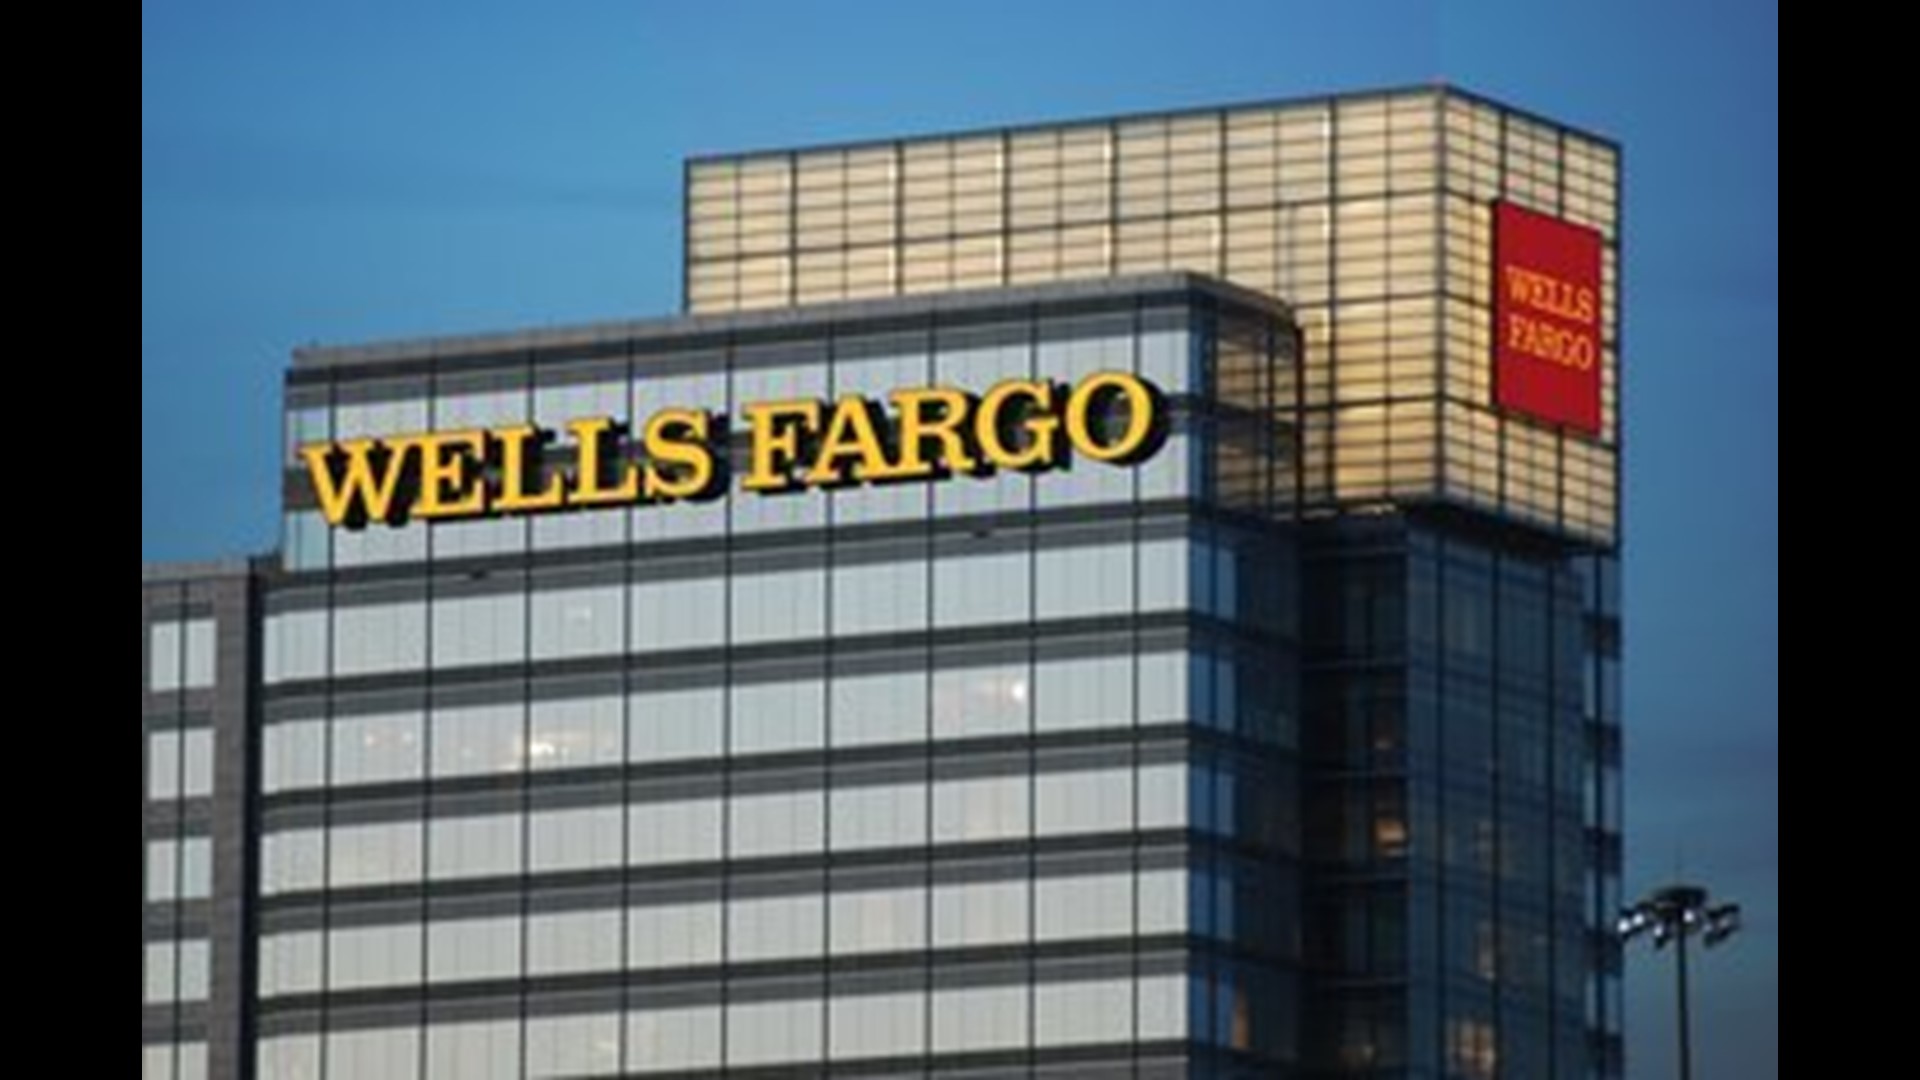 Wells Fargo will pay billions for hiding bad loans prior to 2008 crash